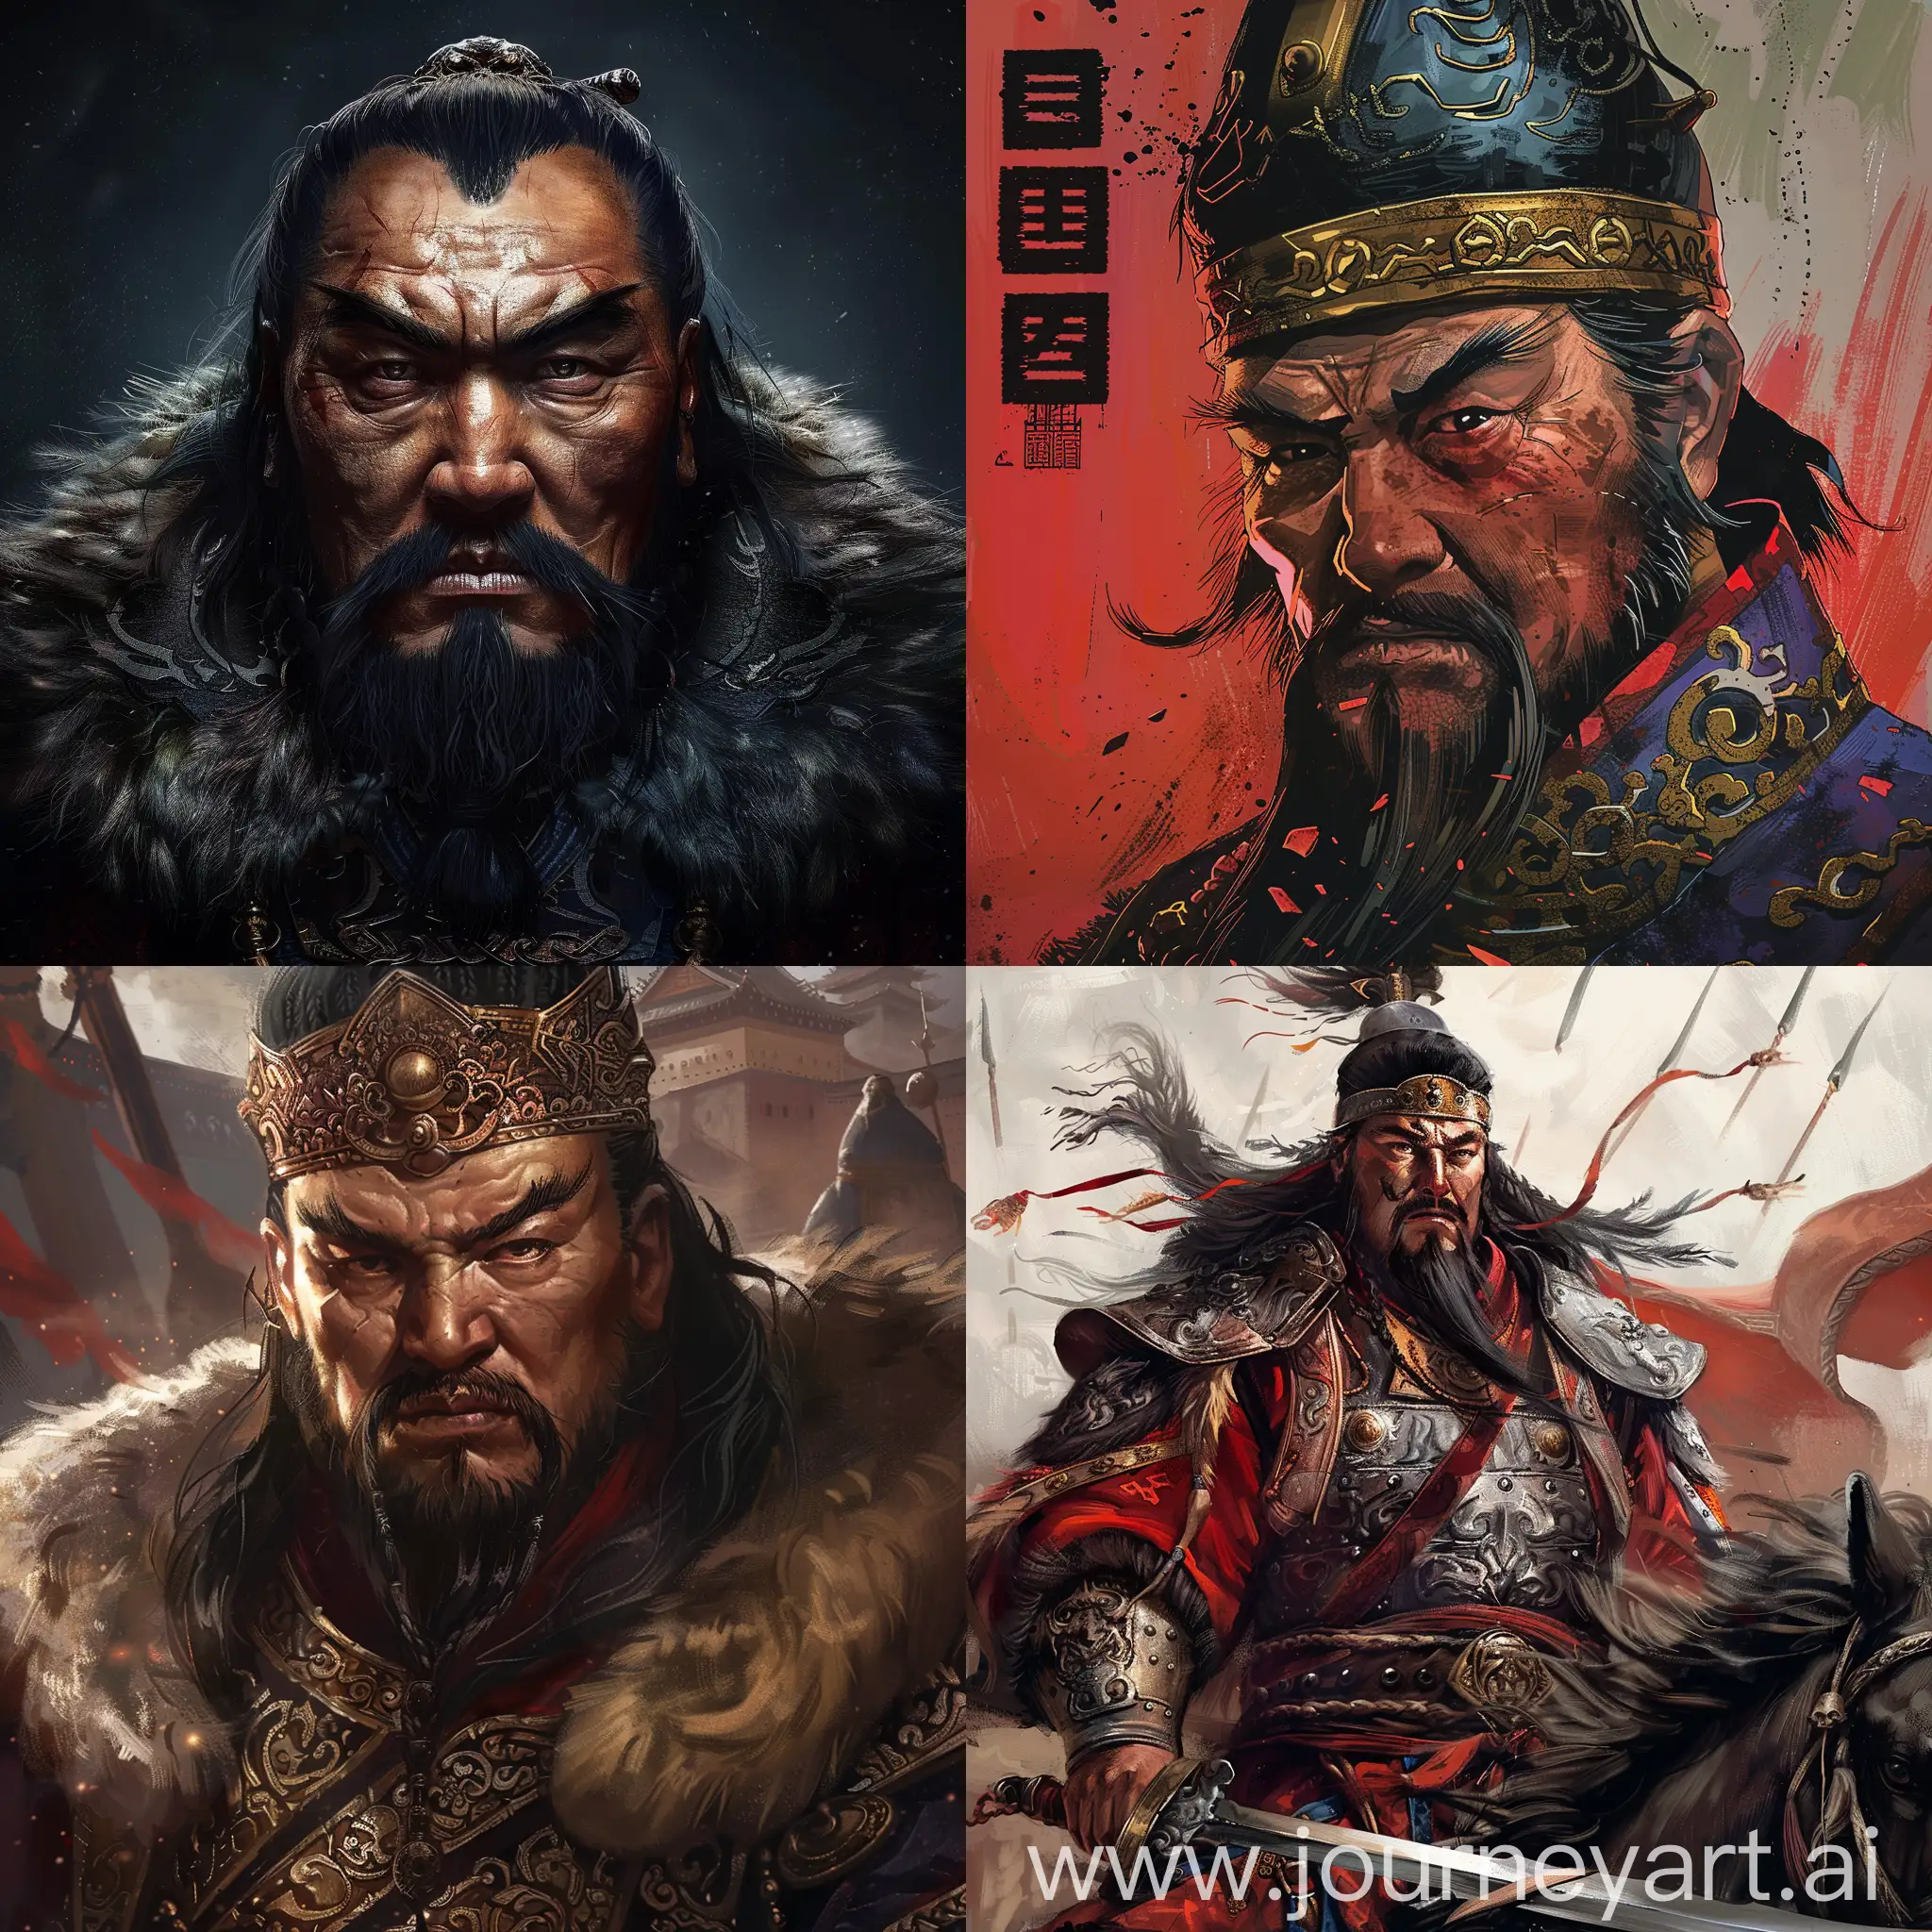 Sinister-Portrait-of-Genghis-Khan-in-a-11-Aspect-Ratio